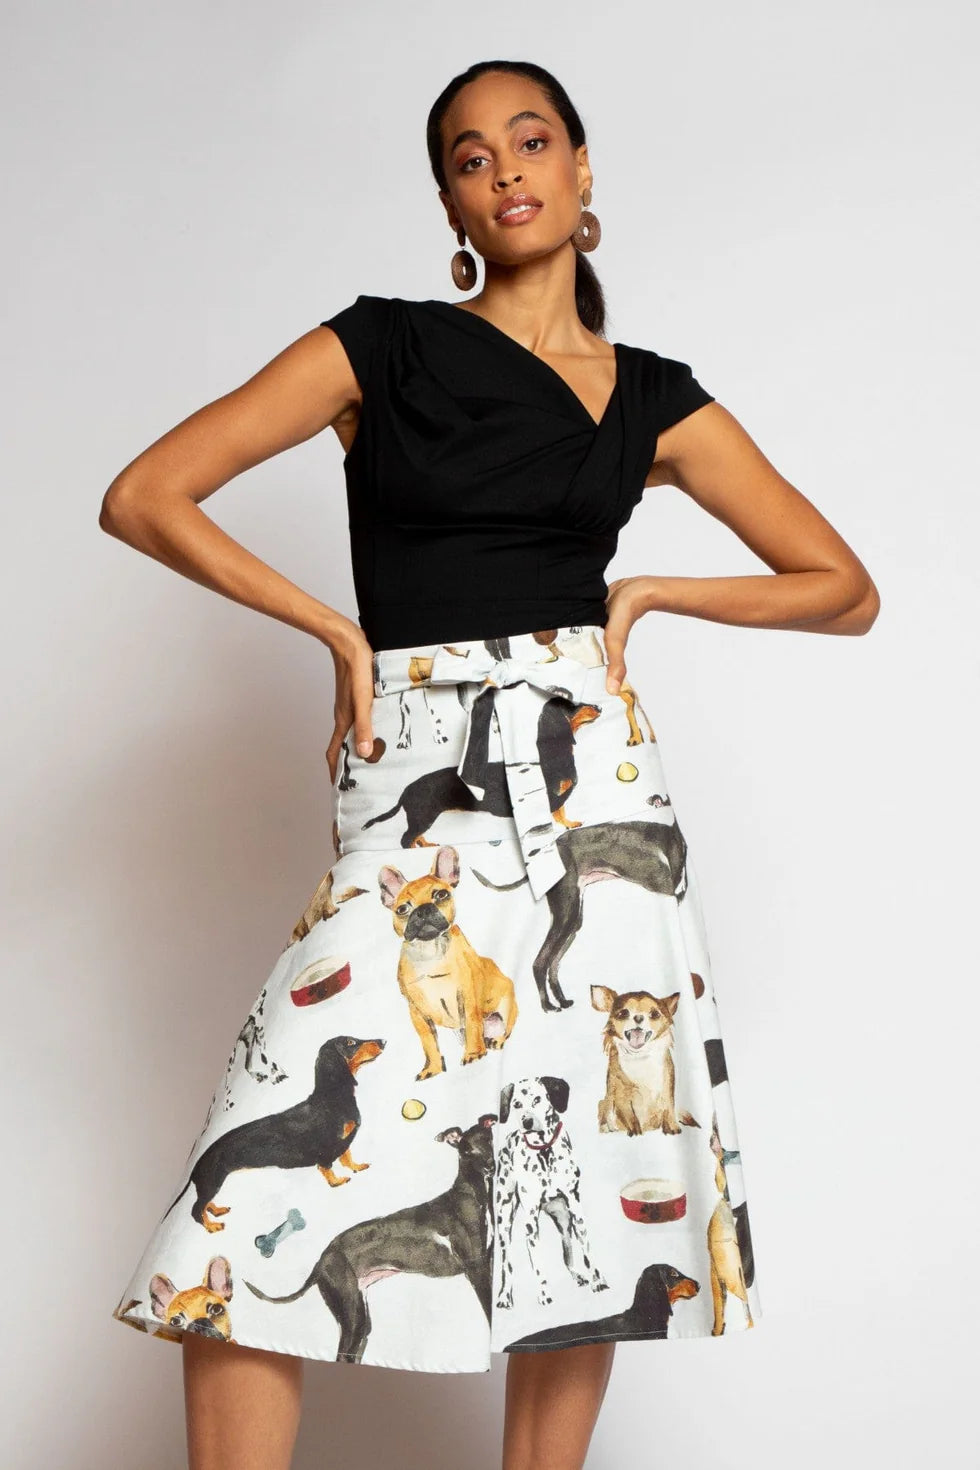 Allas Skirt - Wags & Tails